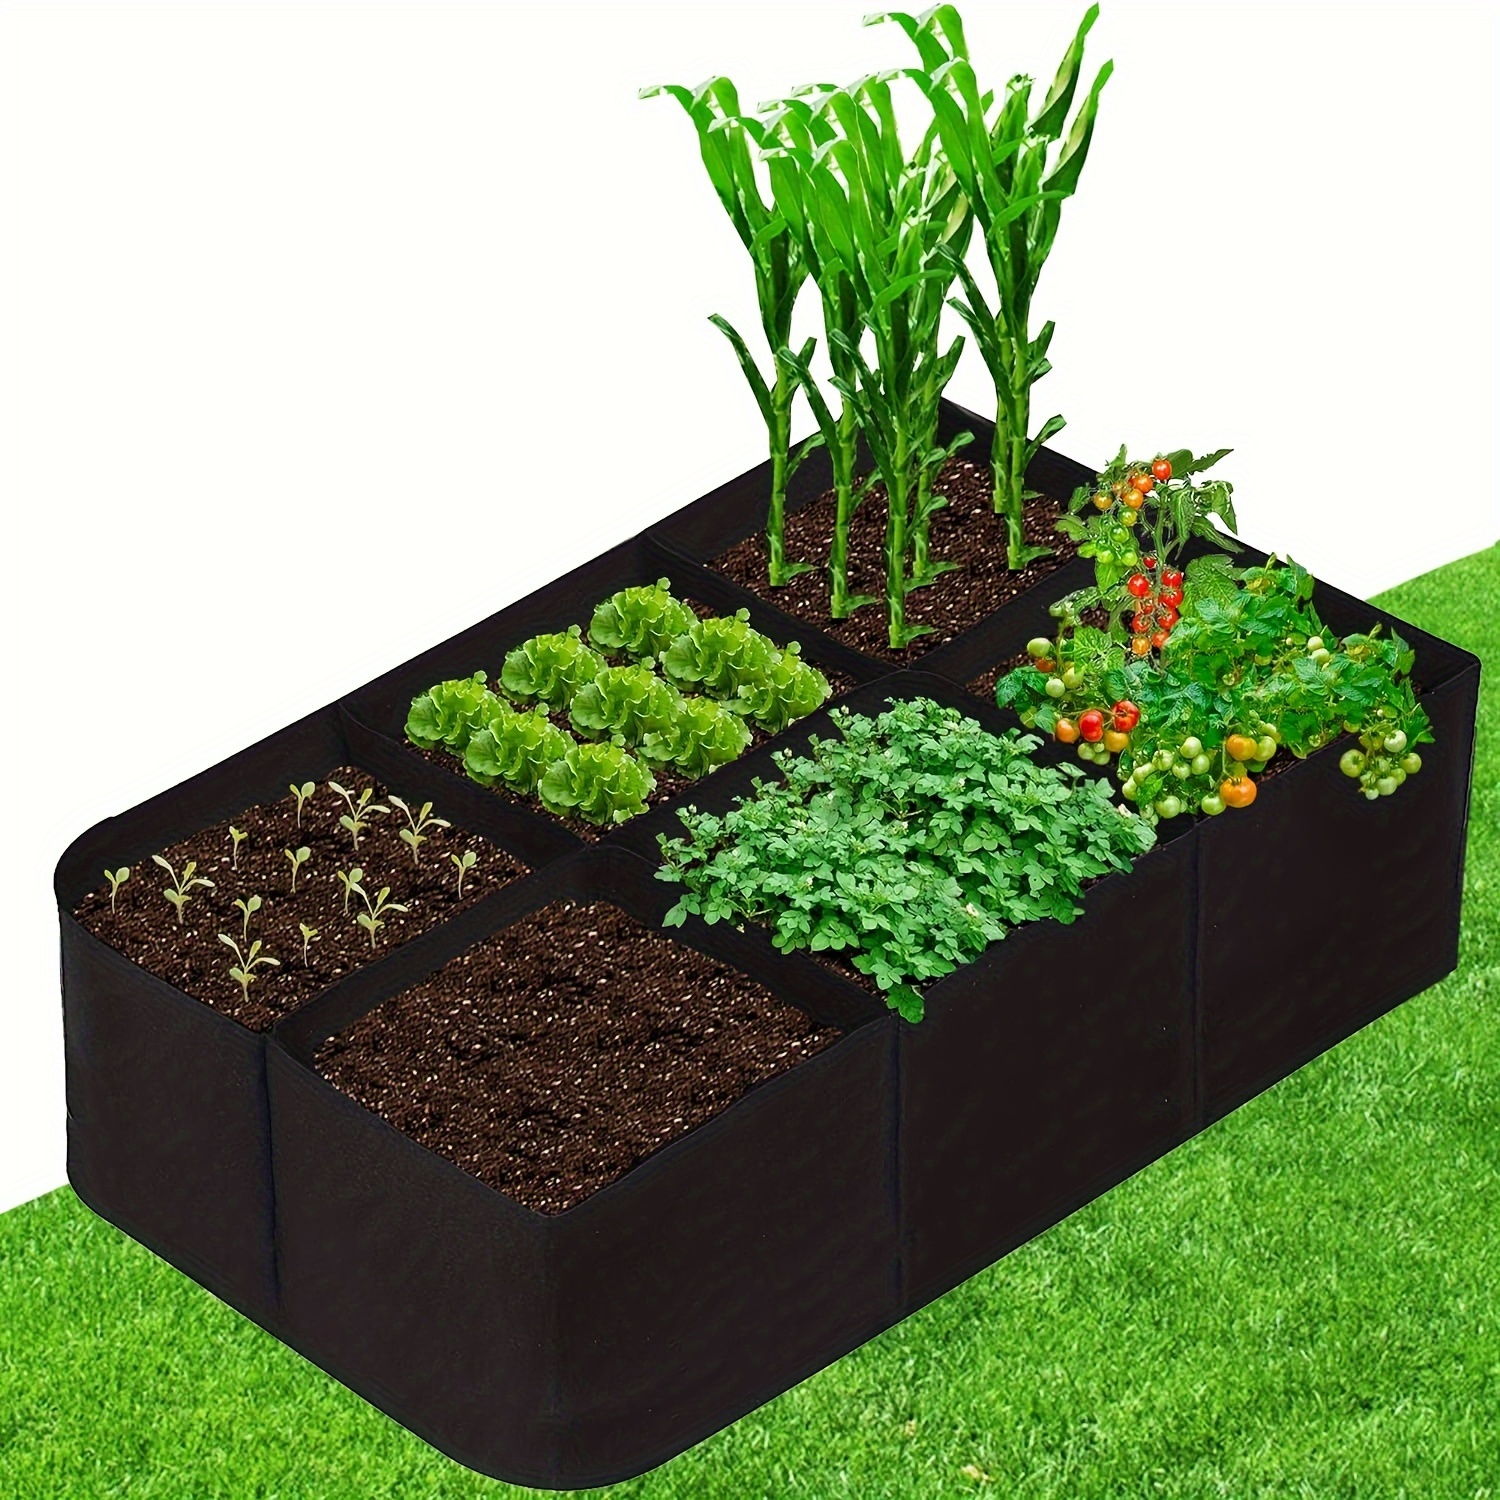 

1 Pack Garden Bed, 55 Gallon 6 Grids Plant Grow Bags, 48x24x12inch Breathable Planter Raised Beds For Growing Vegetables Potatoes Flowers, Rectangle Planting Container For Outdoor Indoor Gardening